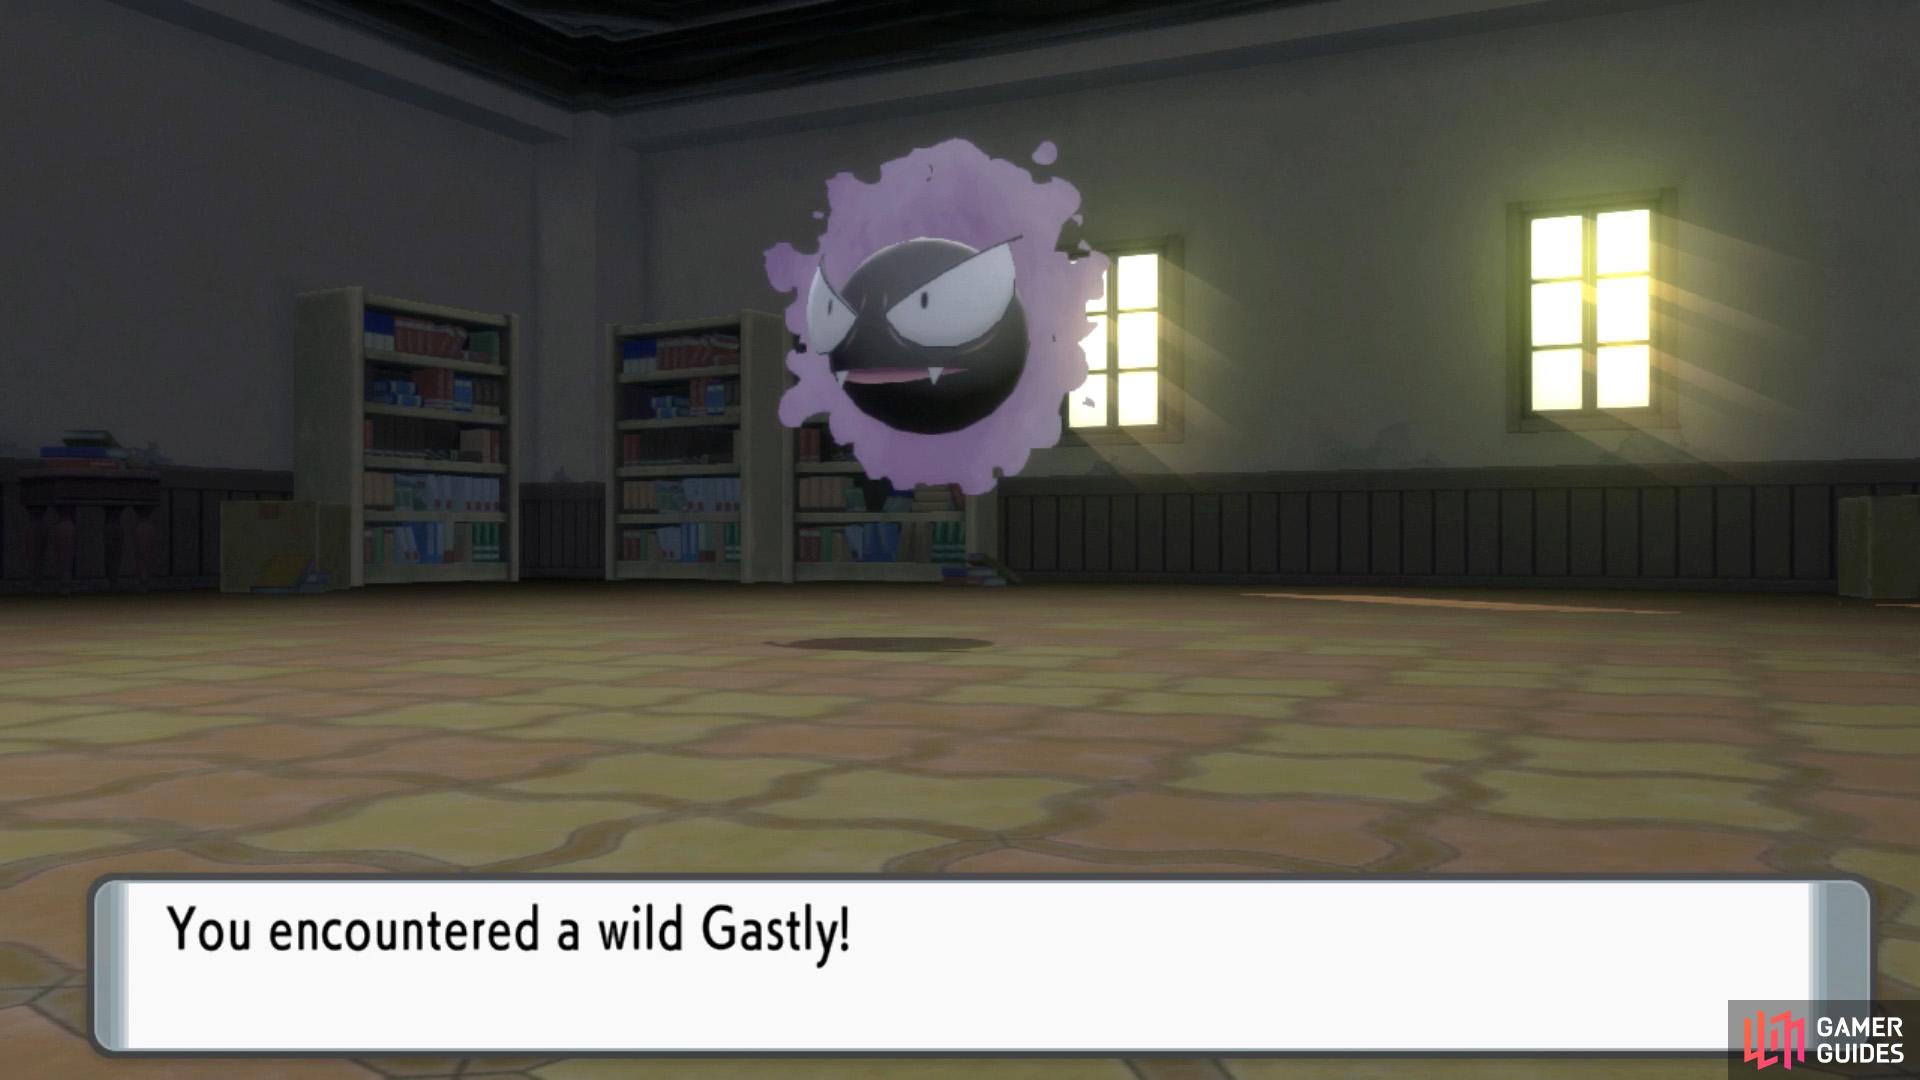 There's nothing but Gastly to be found.